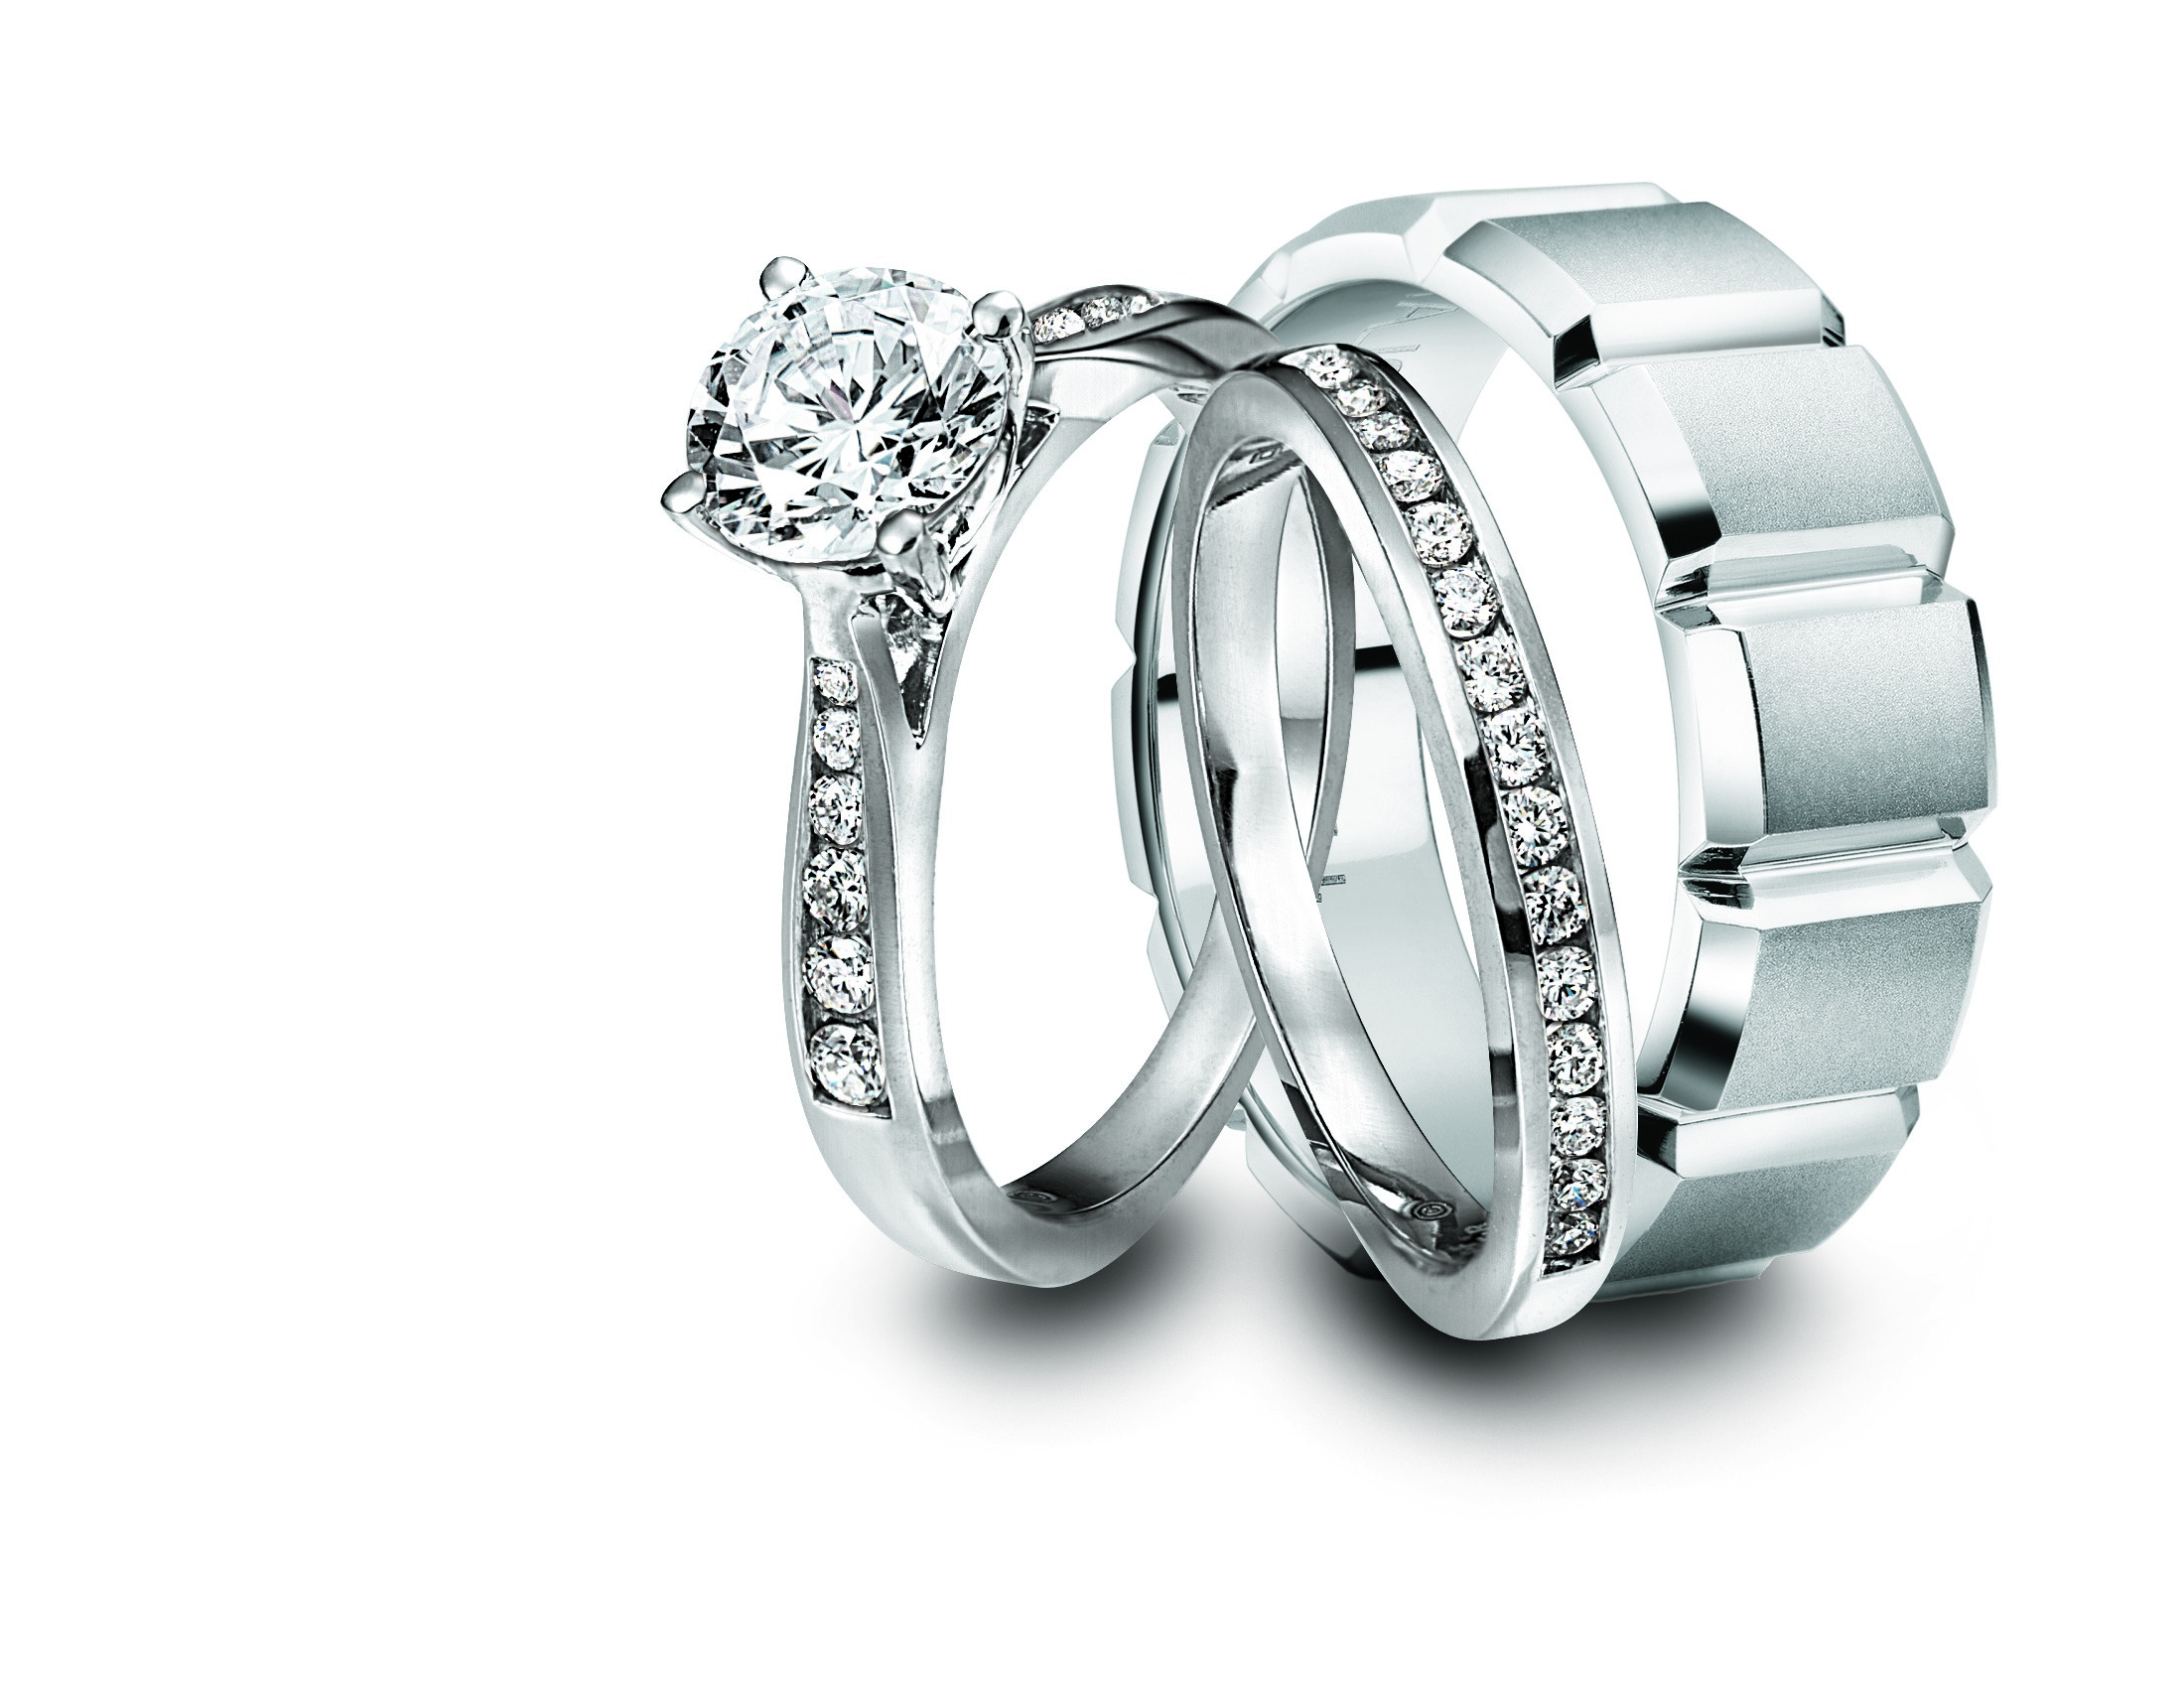 Wedding Band Sets For Him And Her
 Engagement Ring and Wedding Band Set for Him and Her Jeff